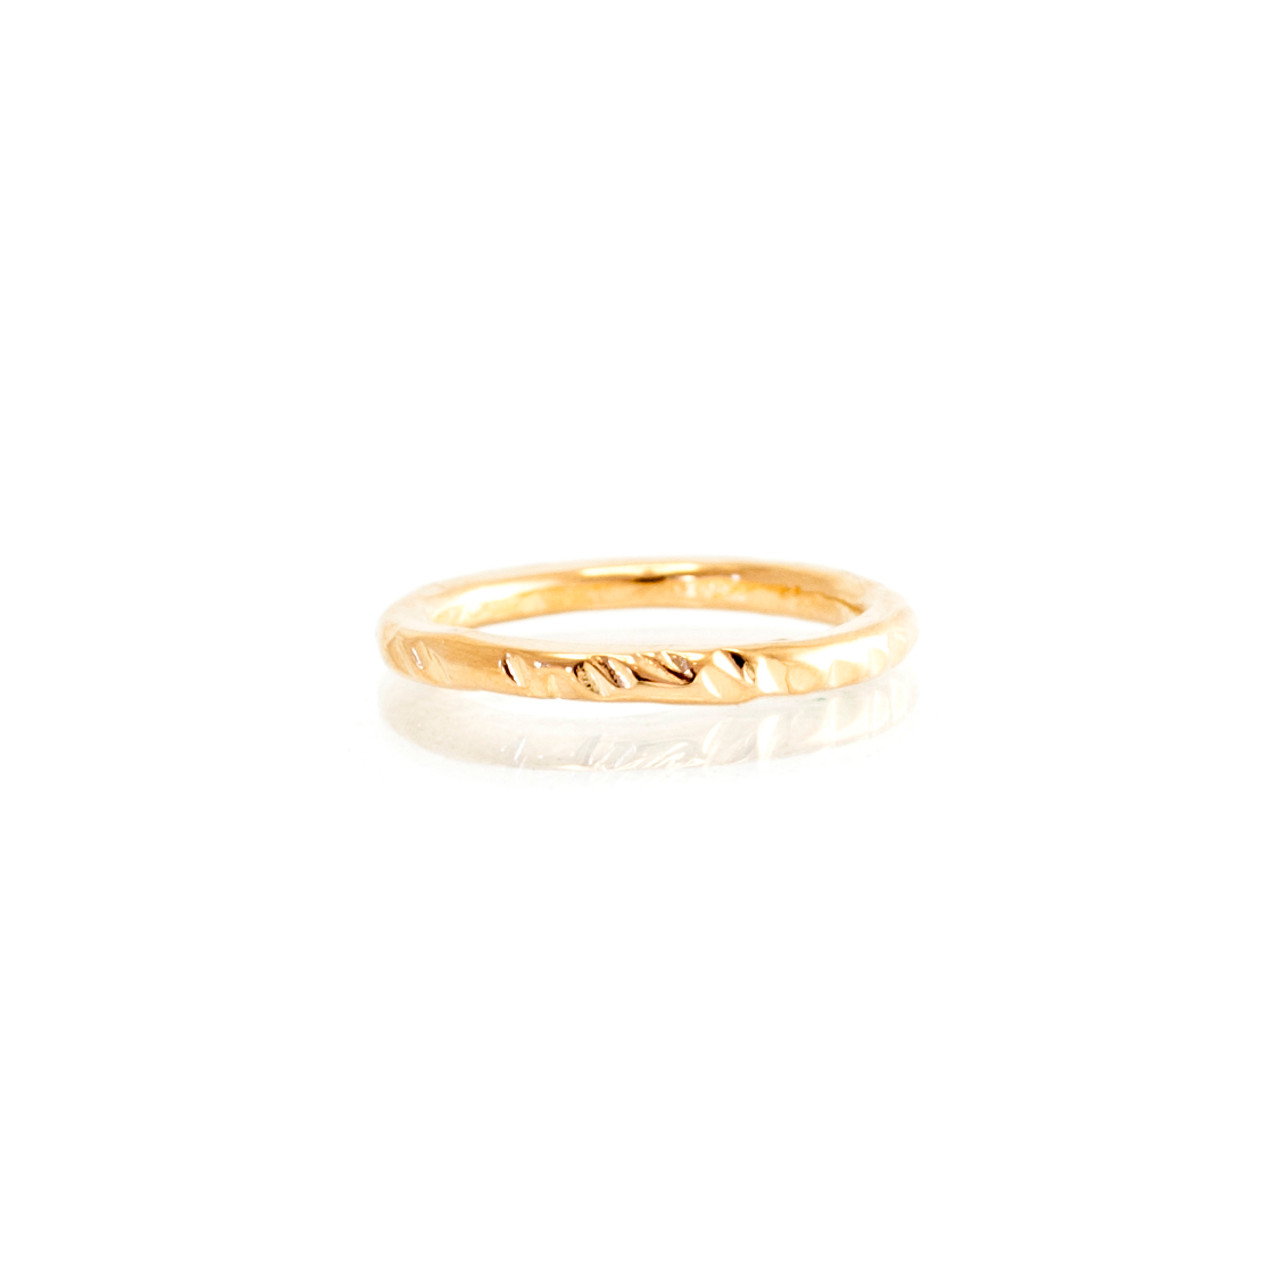 Silver Hammered Stacking Ring: Choose from Gold or Silver